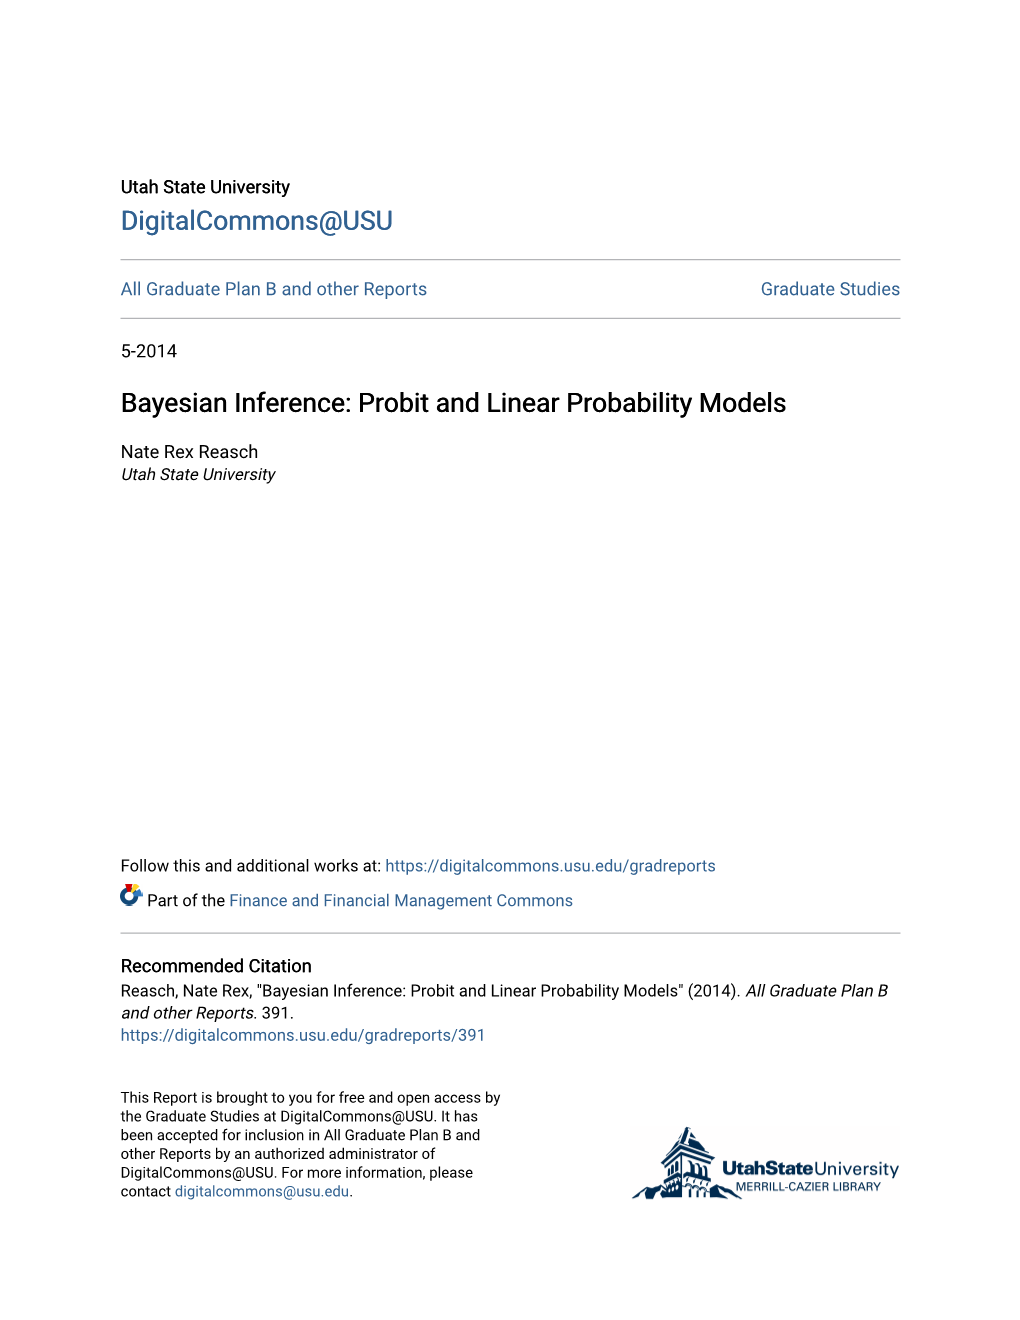 Bayesian Inference: Probit and Linear Probability Models